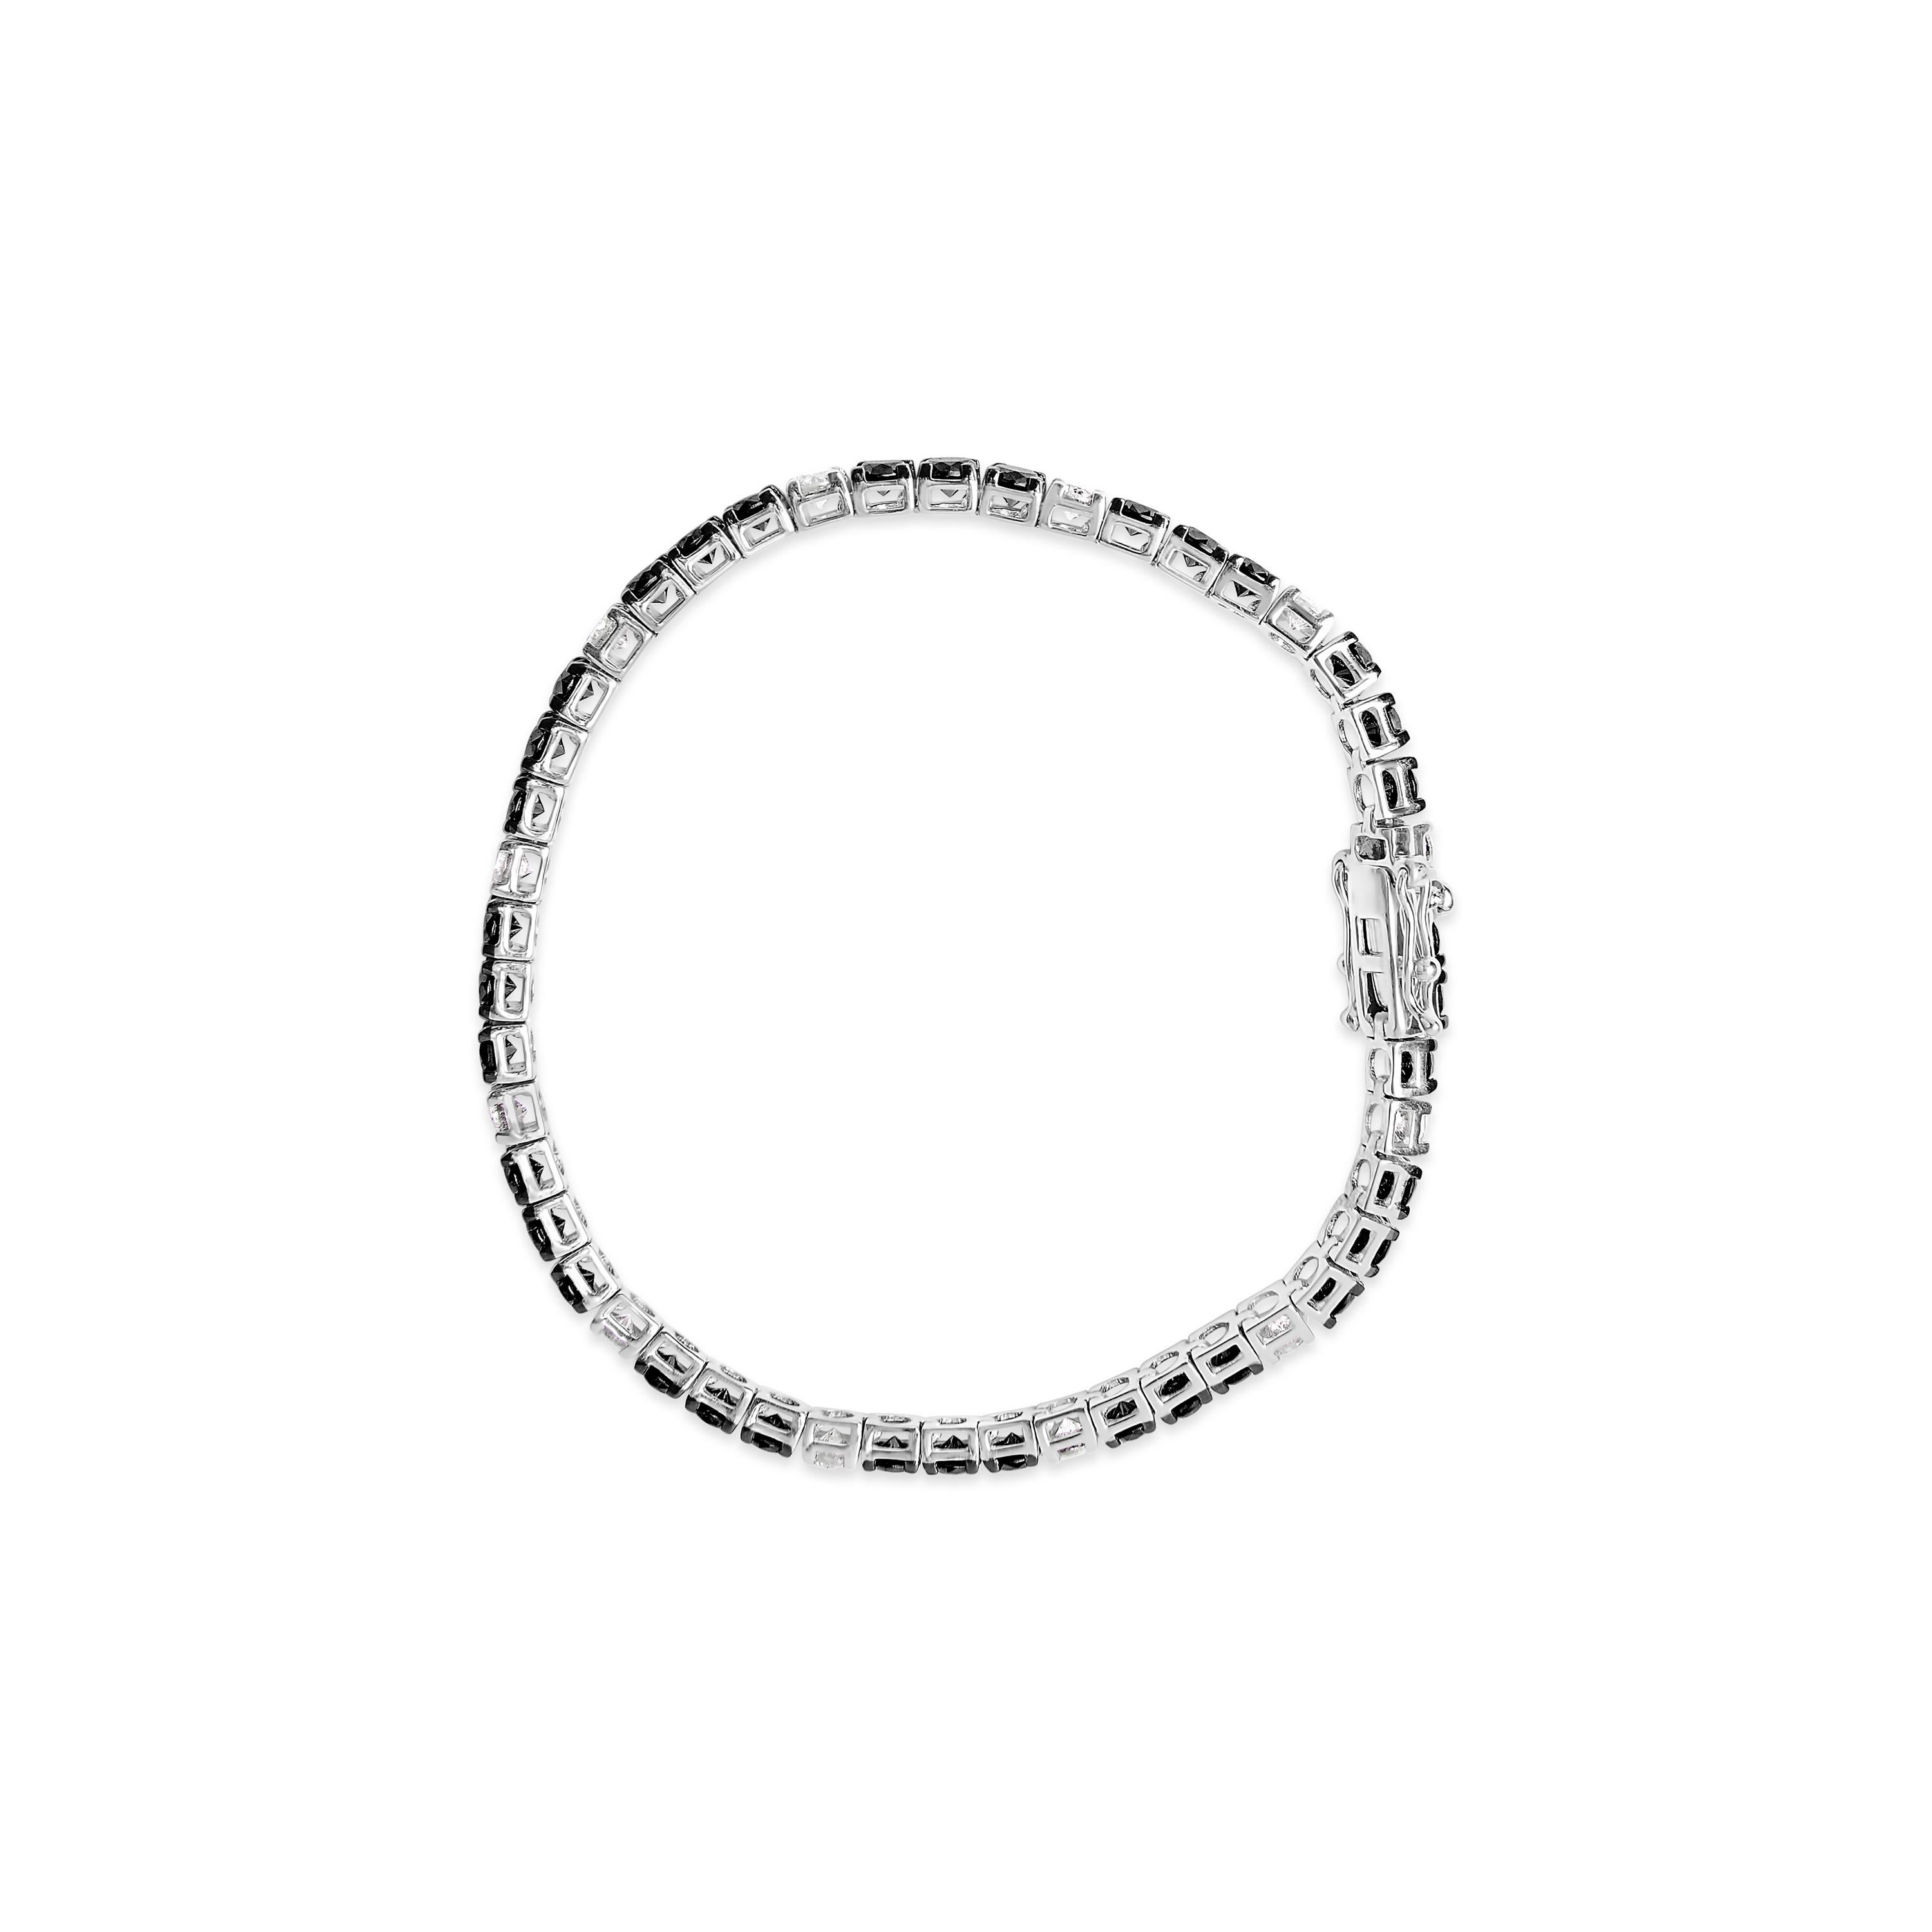 Contemporary 10.00 Carat White and Black Round Diamond Tennis Bracelet in Silver - 7.25 Inch